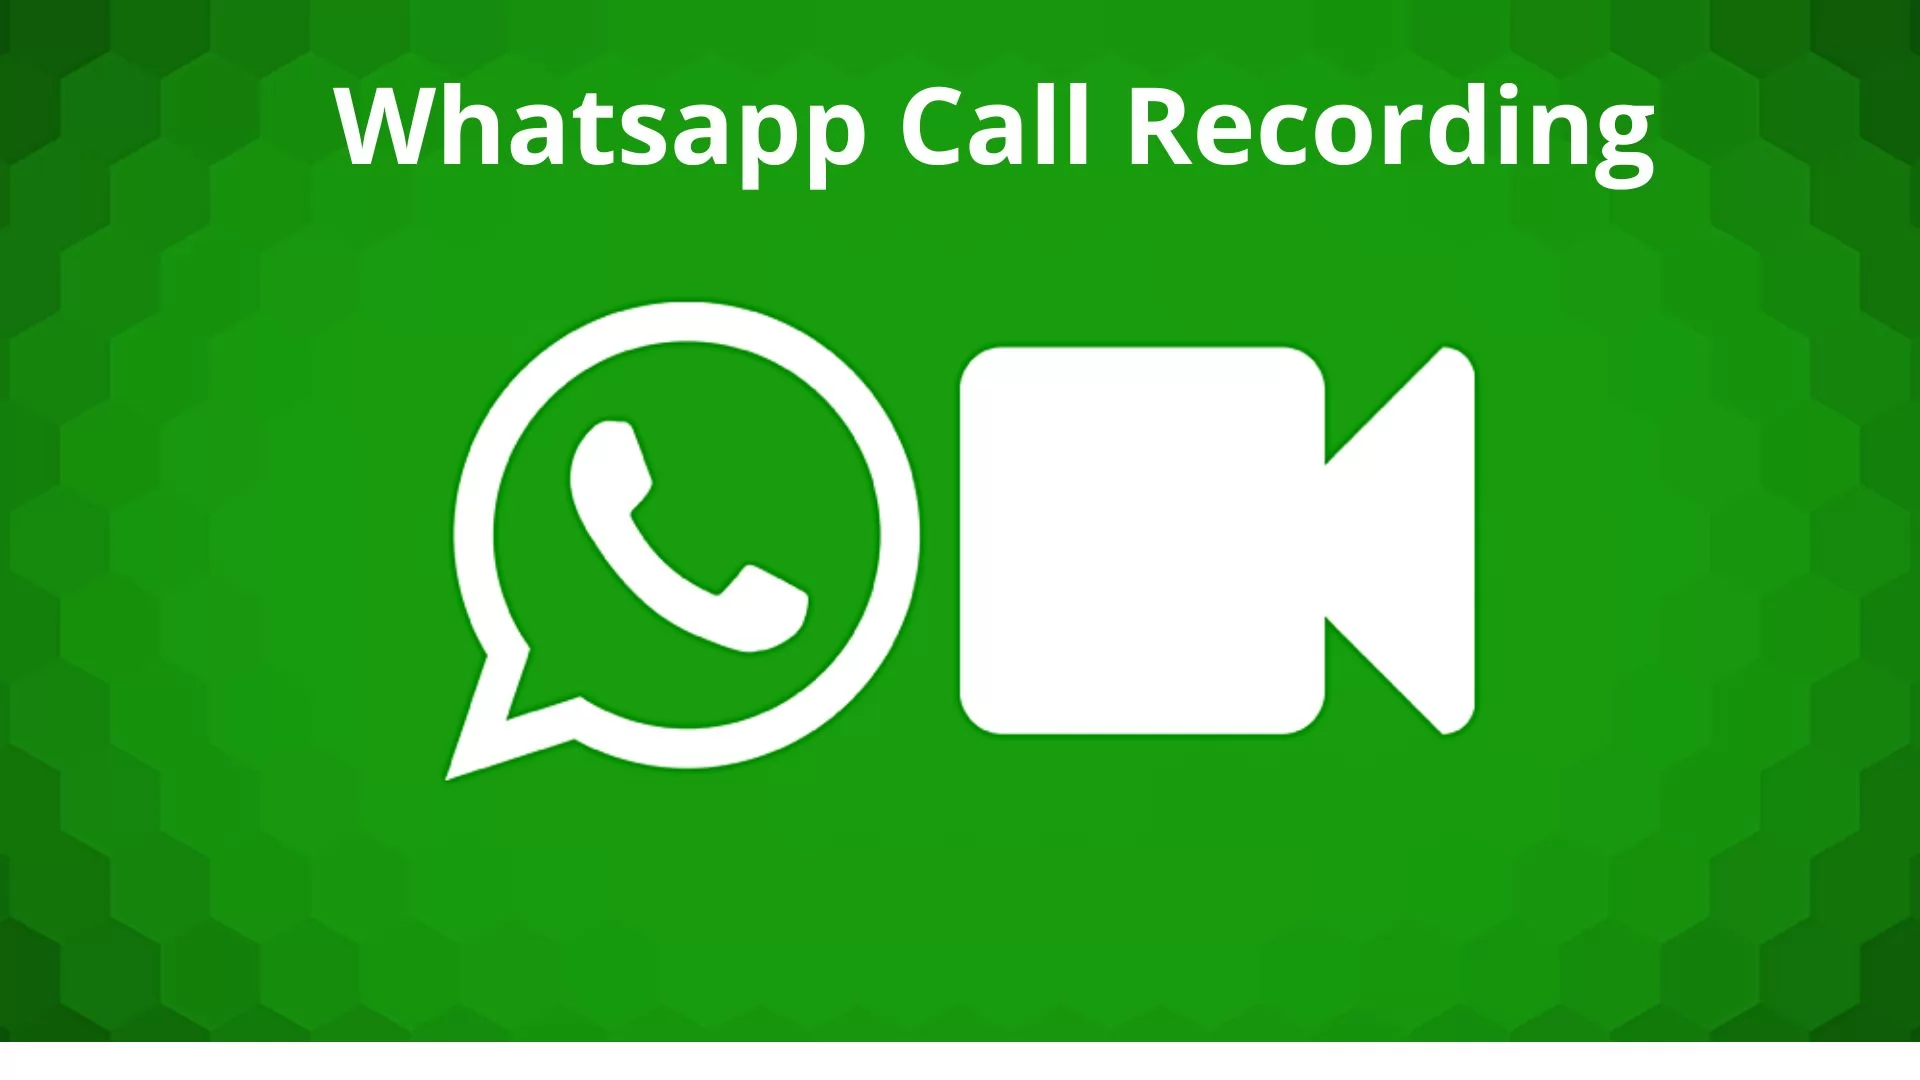 How to Record Whatsapp Video Call with Audio?